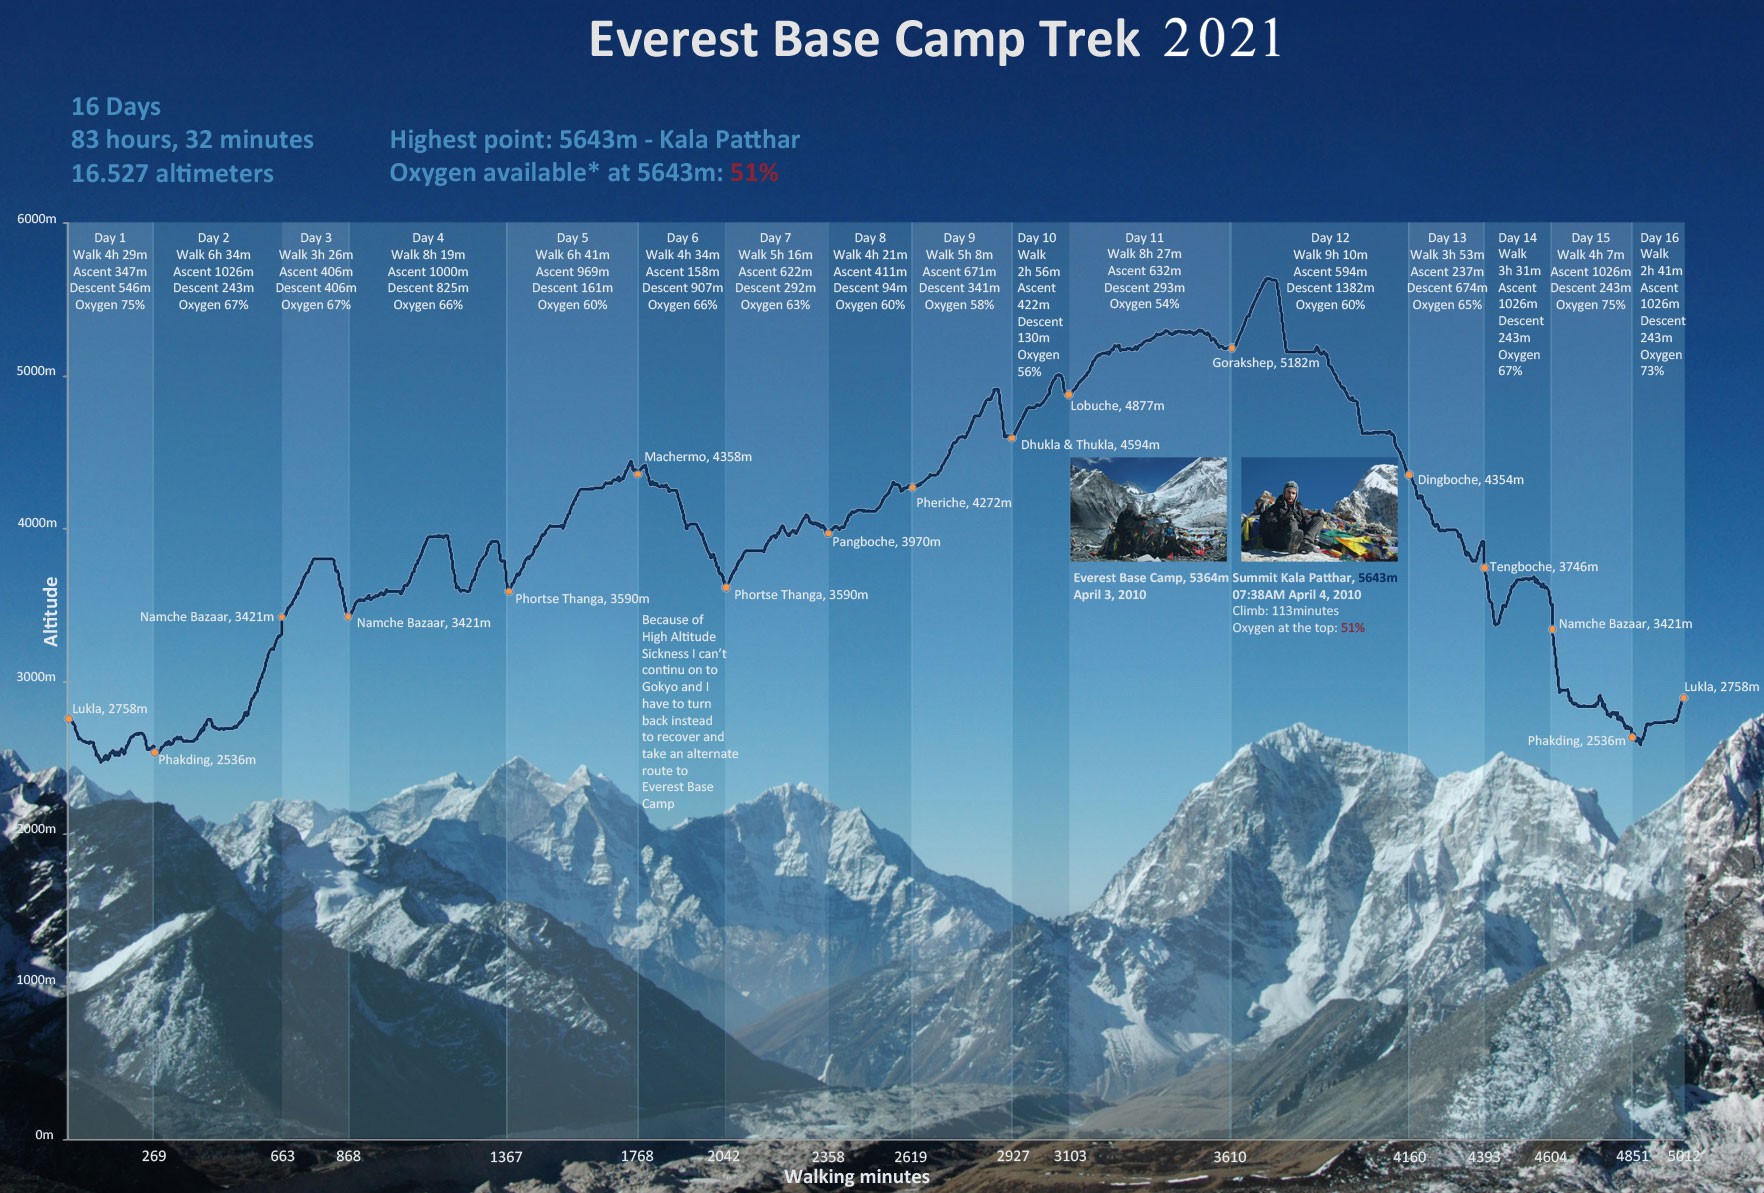 Time Duration Required for Everest Base Camp Trekking in 2021